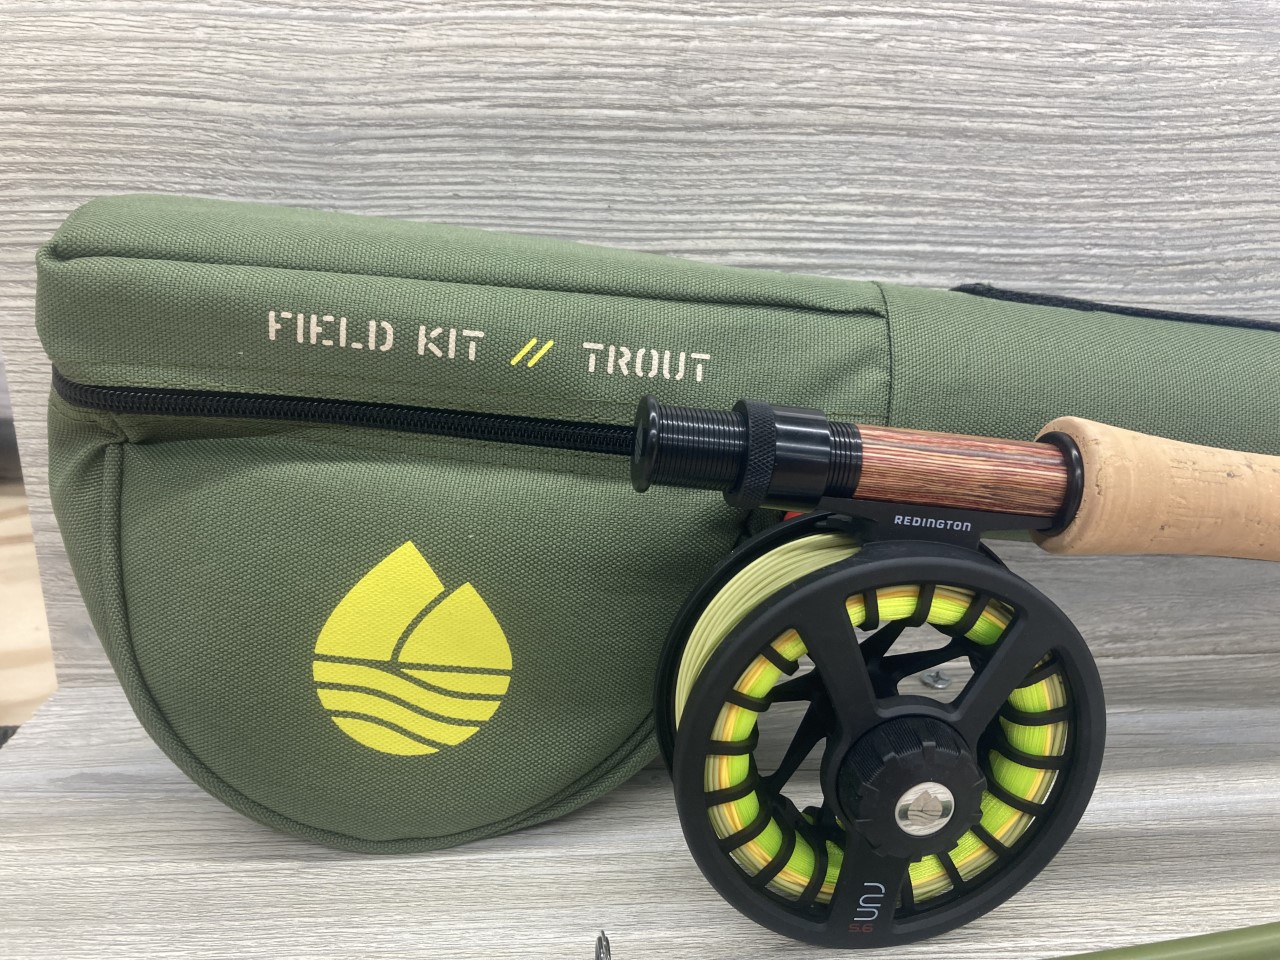 Redington - The new FIELD KIT-TROUT Combo, is up for any